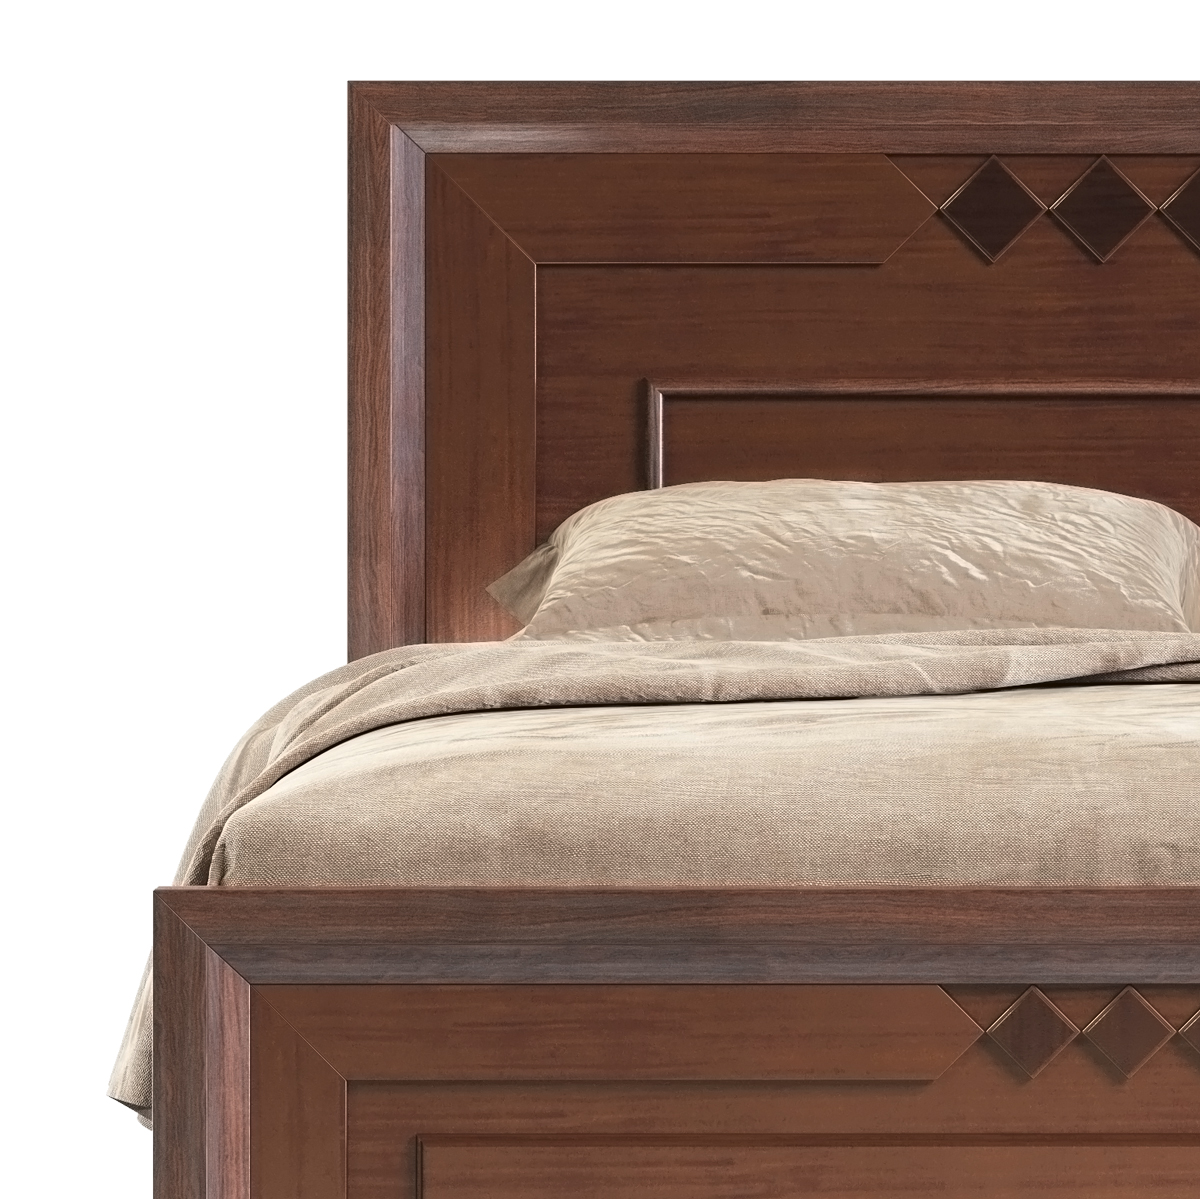 5 Star Wooden King bed I BDH-365-3-1-20